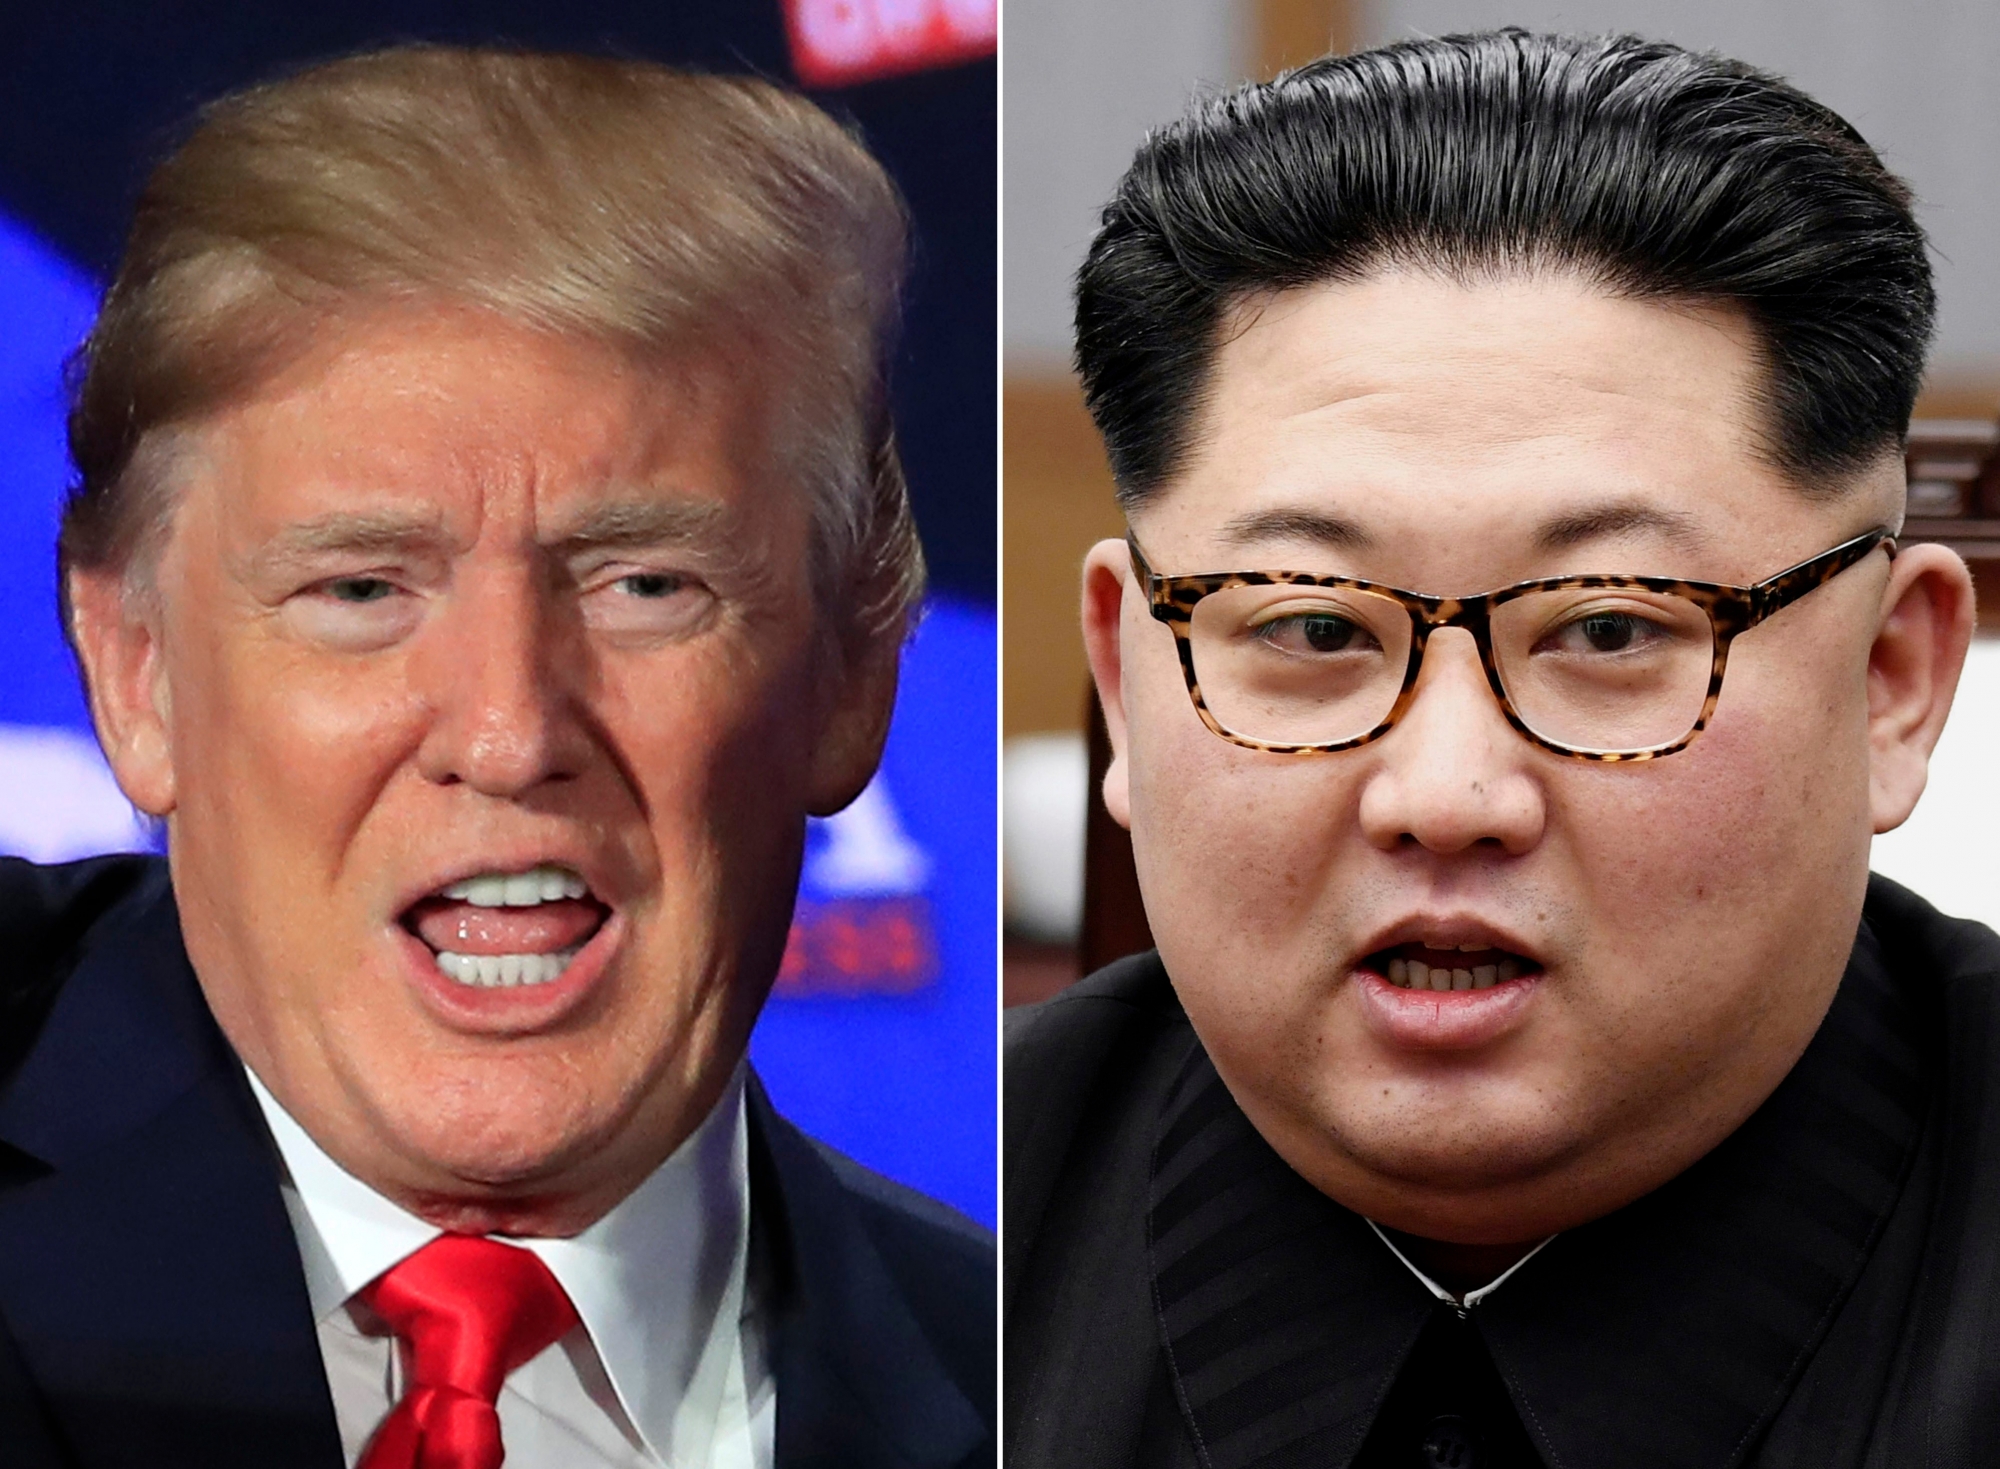 FILE - This combination of two file photos shows U.S. President Donald Trump, left, speaking during a roundtable discussion on tax cuts in Cleveland, Ohio, May 5, 2018 and North Korean leader Kim Jong Un, right, talking with South Korean President Moon Jae-in in Panmunjom, South Korea, April 27, 2018. With just weeks to go before President Trump and North Korean leader Kim are expected to hold their first-ever summit, Pyongyang on Sunday, May 6, 2018, criticized what it called "misleading" claims that Trump's policy of maximum political pressure and sanctions are what drove the North to the negotiating table. (AP Photo/Manuel Balce Ceneta, Korea Summit Press Pool via AP, File) North Korea US